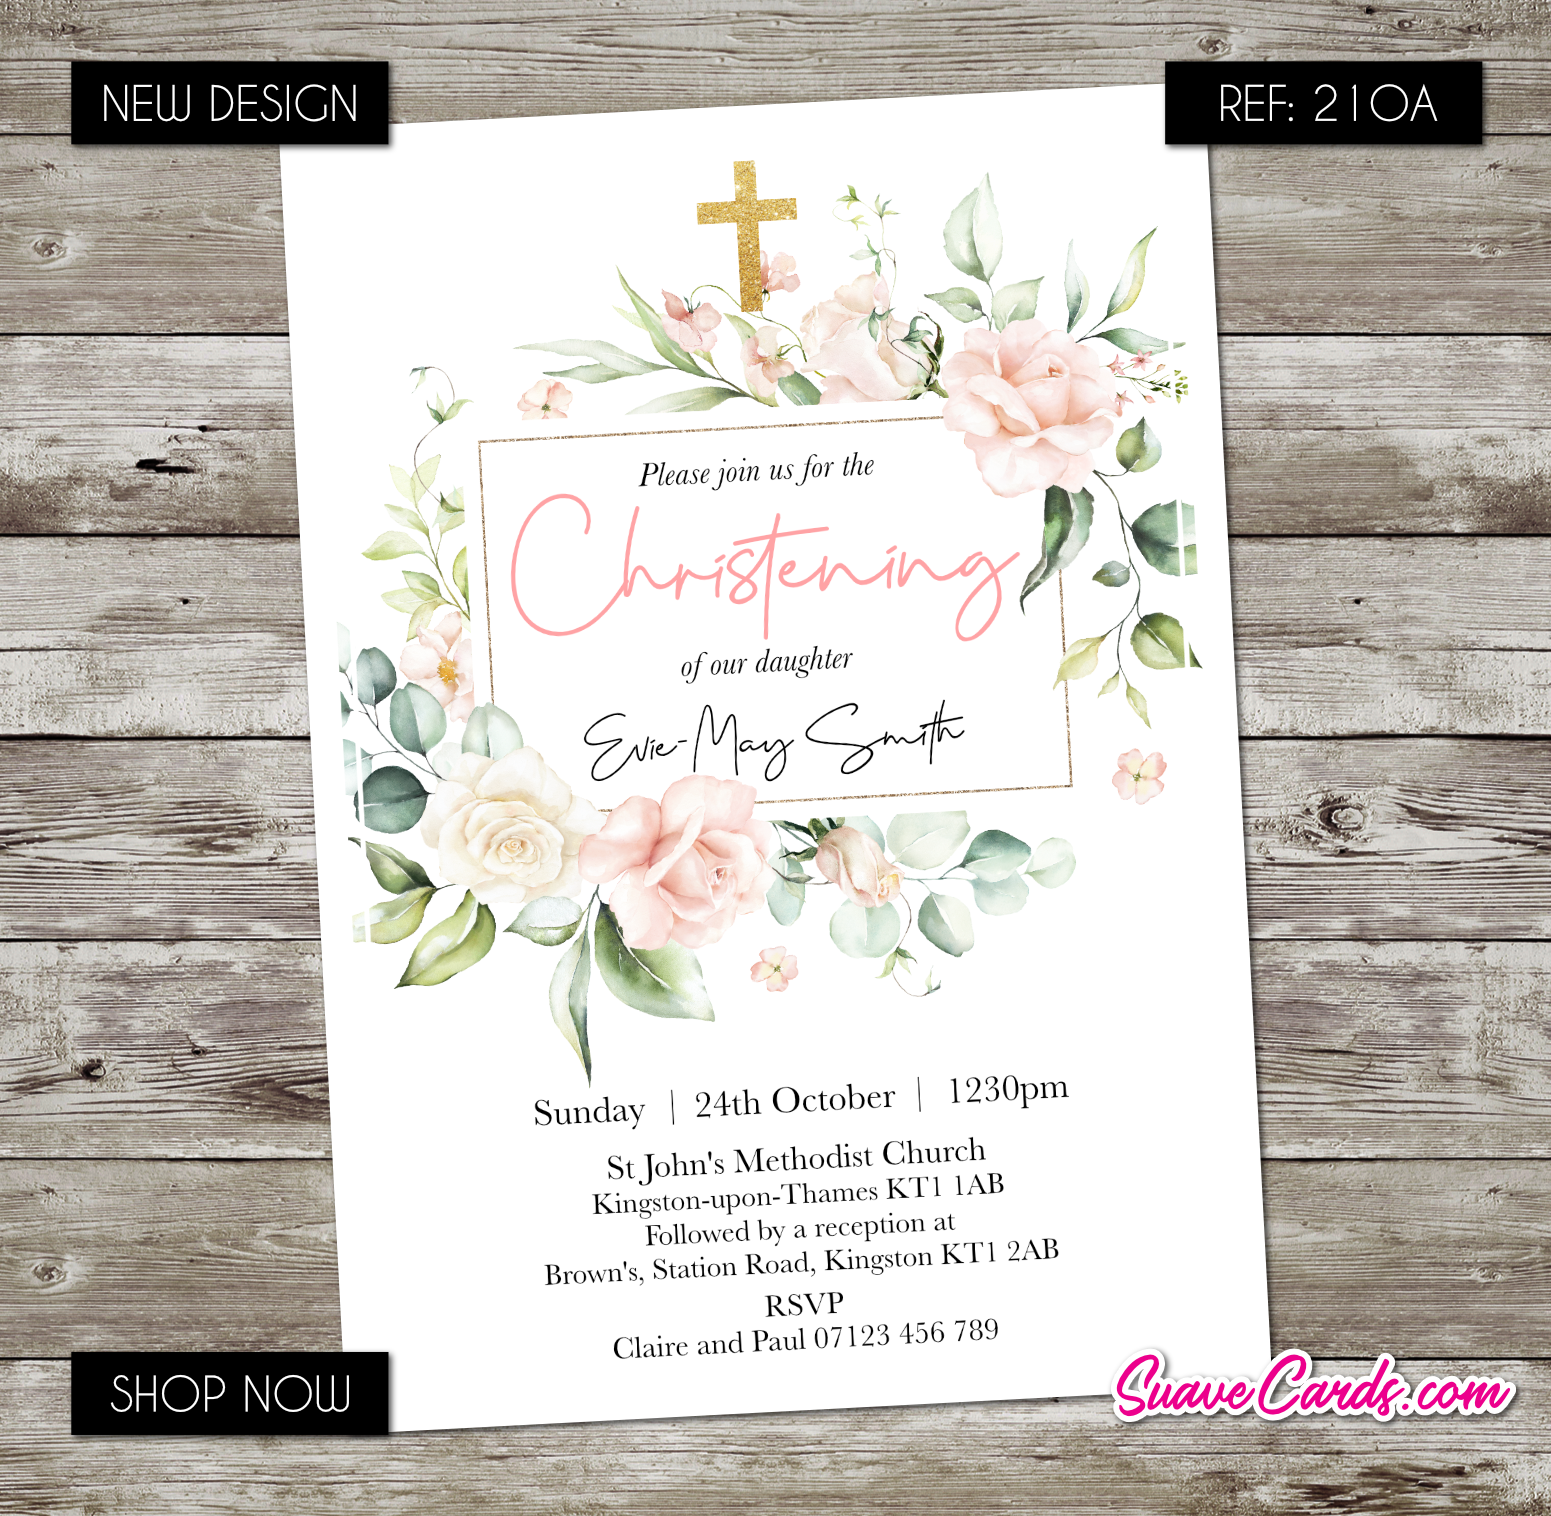 Baptism/Christening/Holy Communion – Floral Wreath (for any occasion)